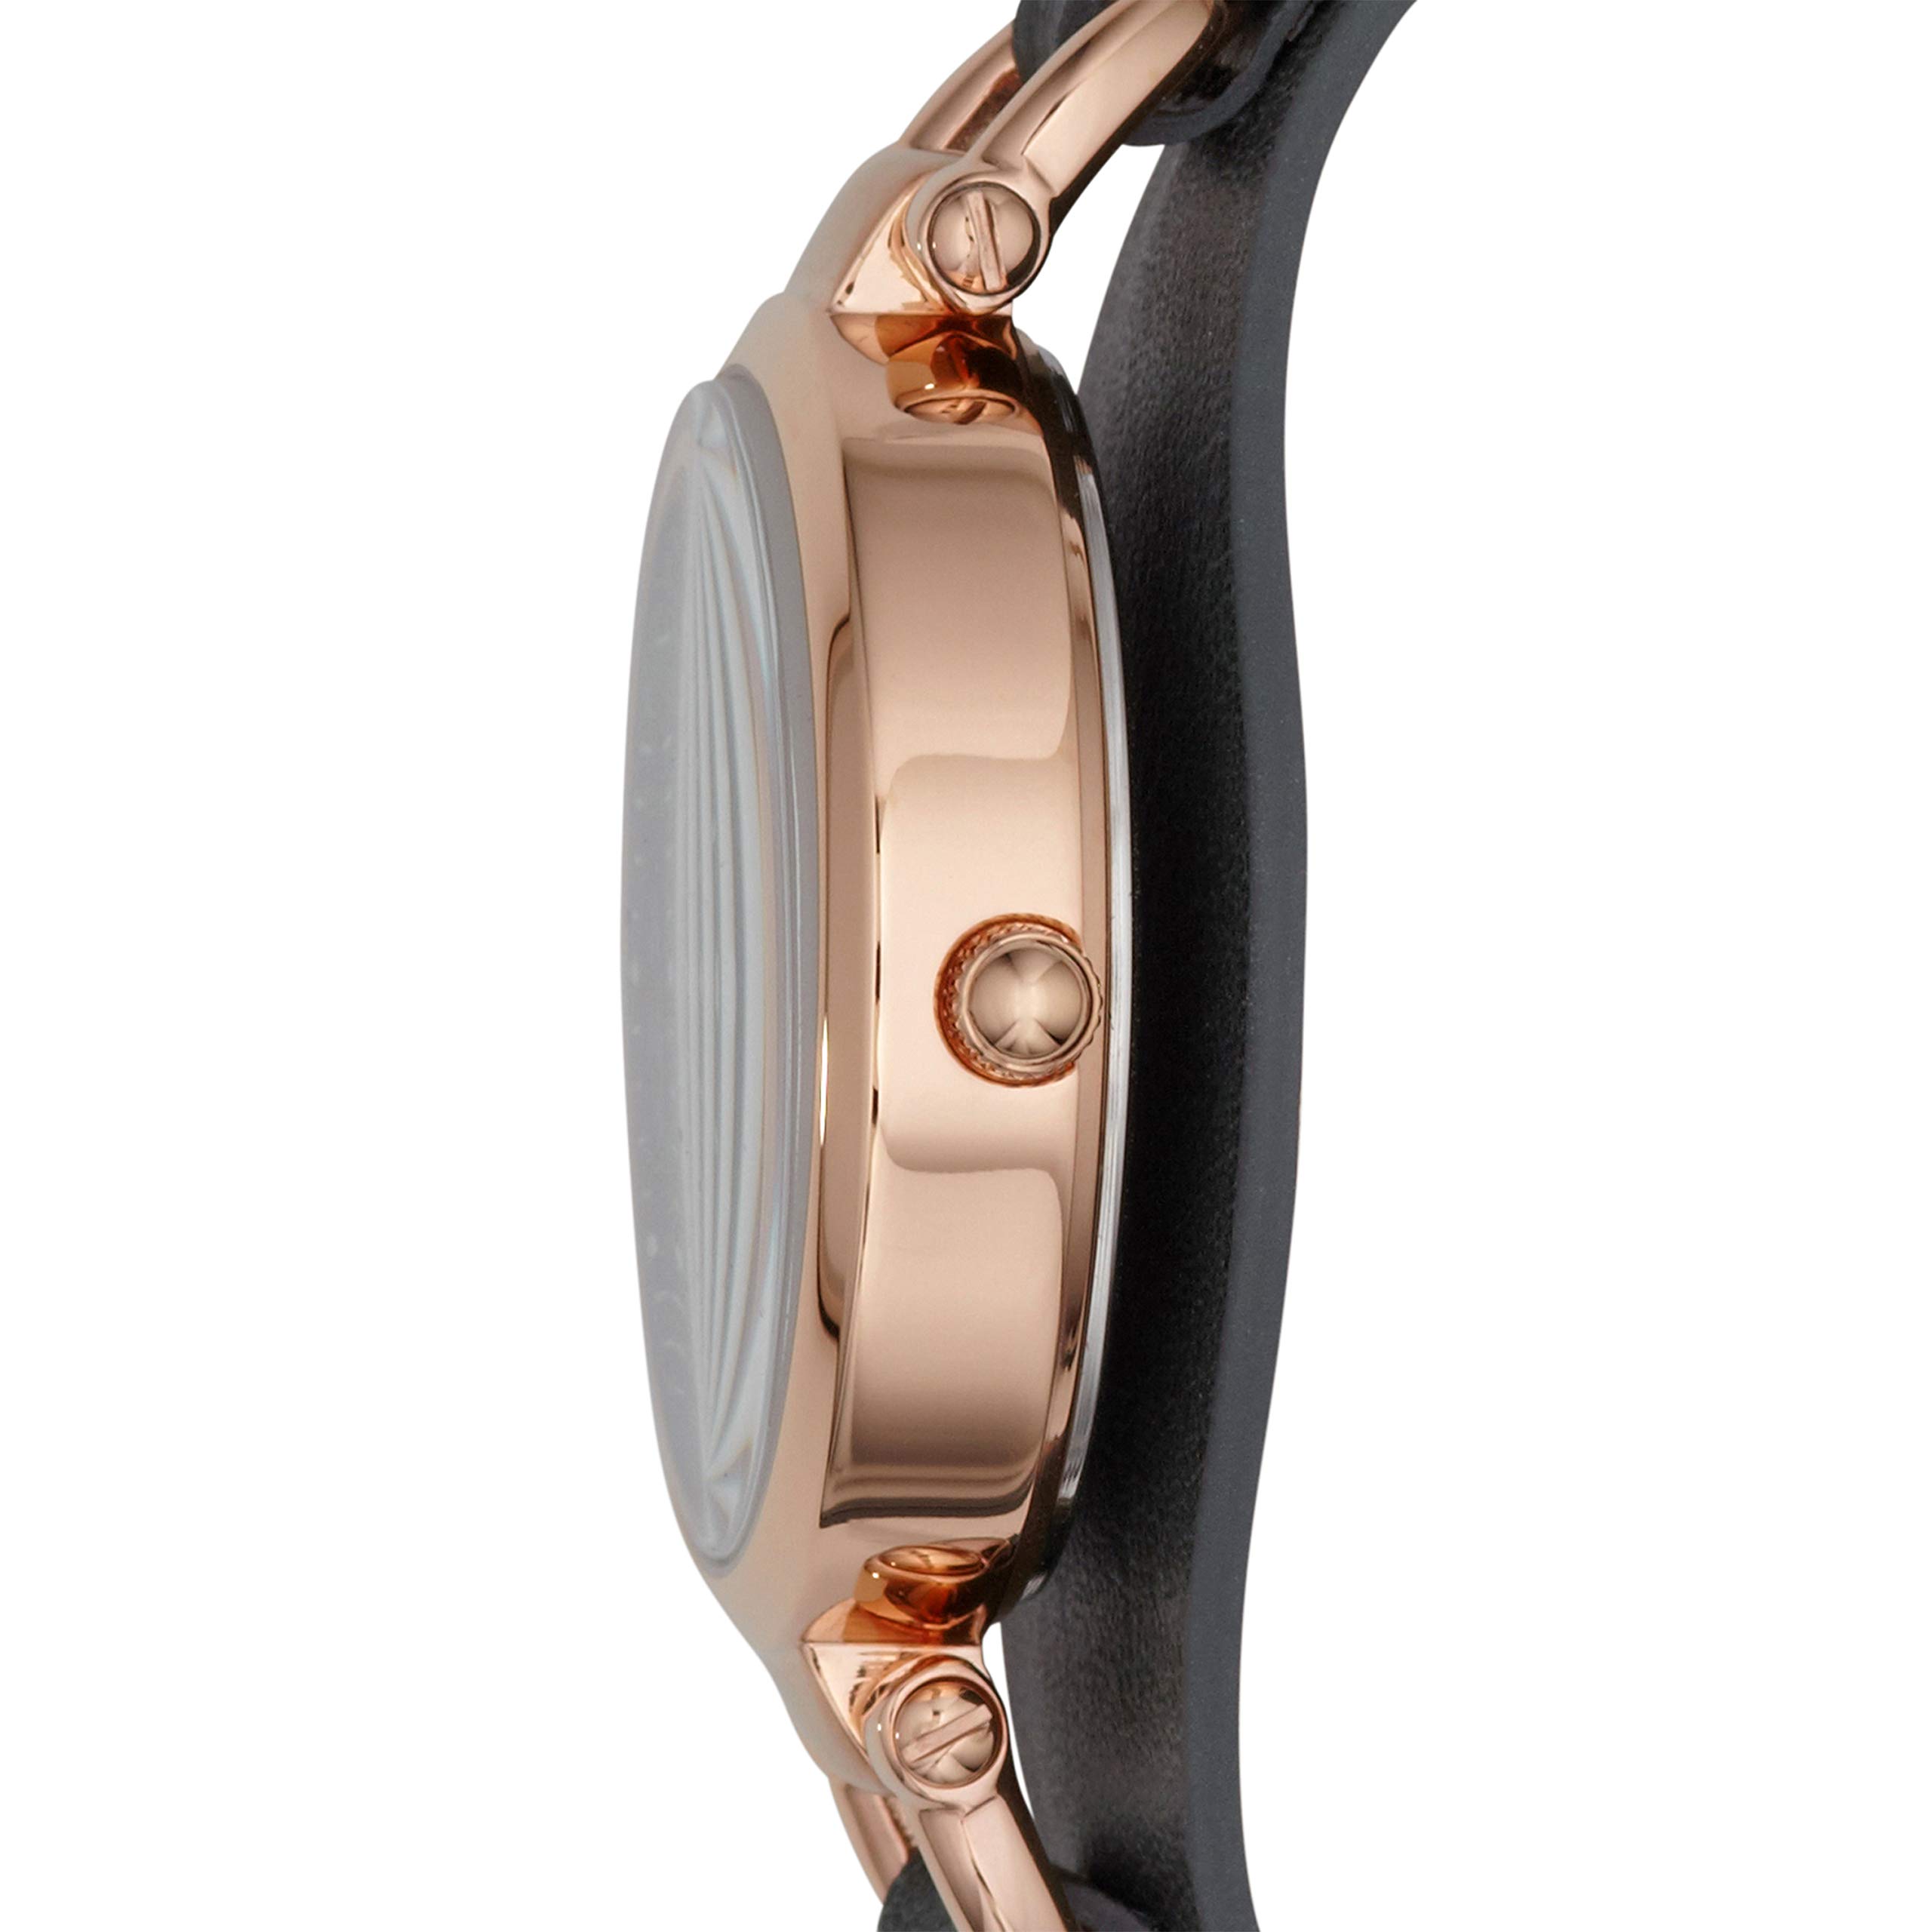 Fossil Women's Georgia Quartz Stainless Steel and Leather Three-Hand Watch, Color: Rose Gold, Grey (Model: ES3077)